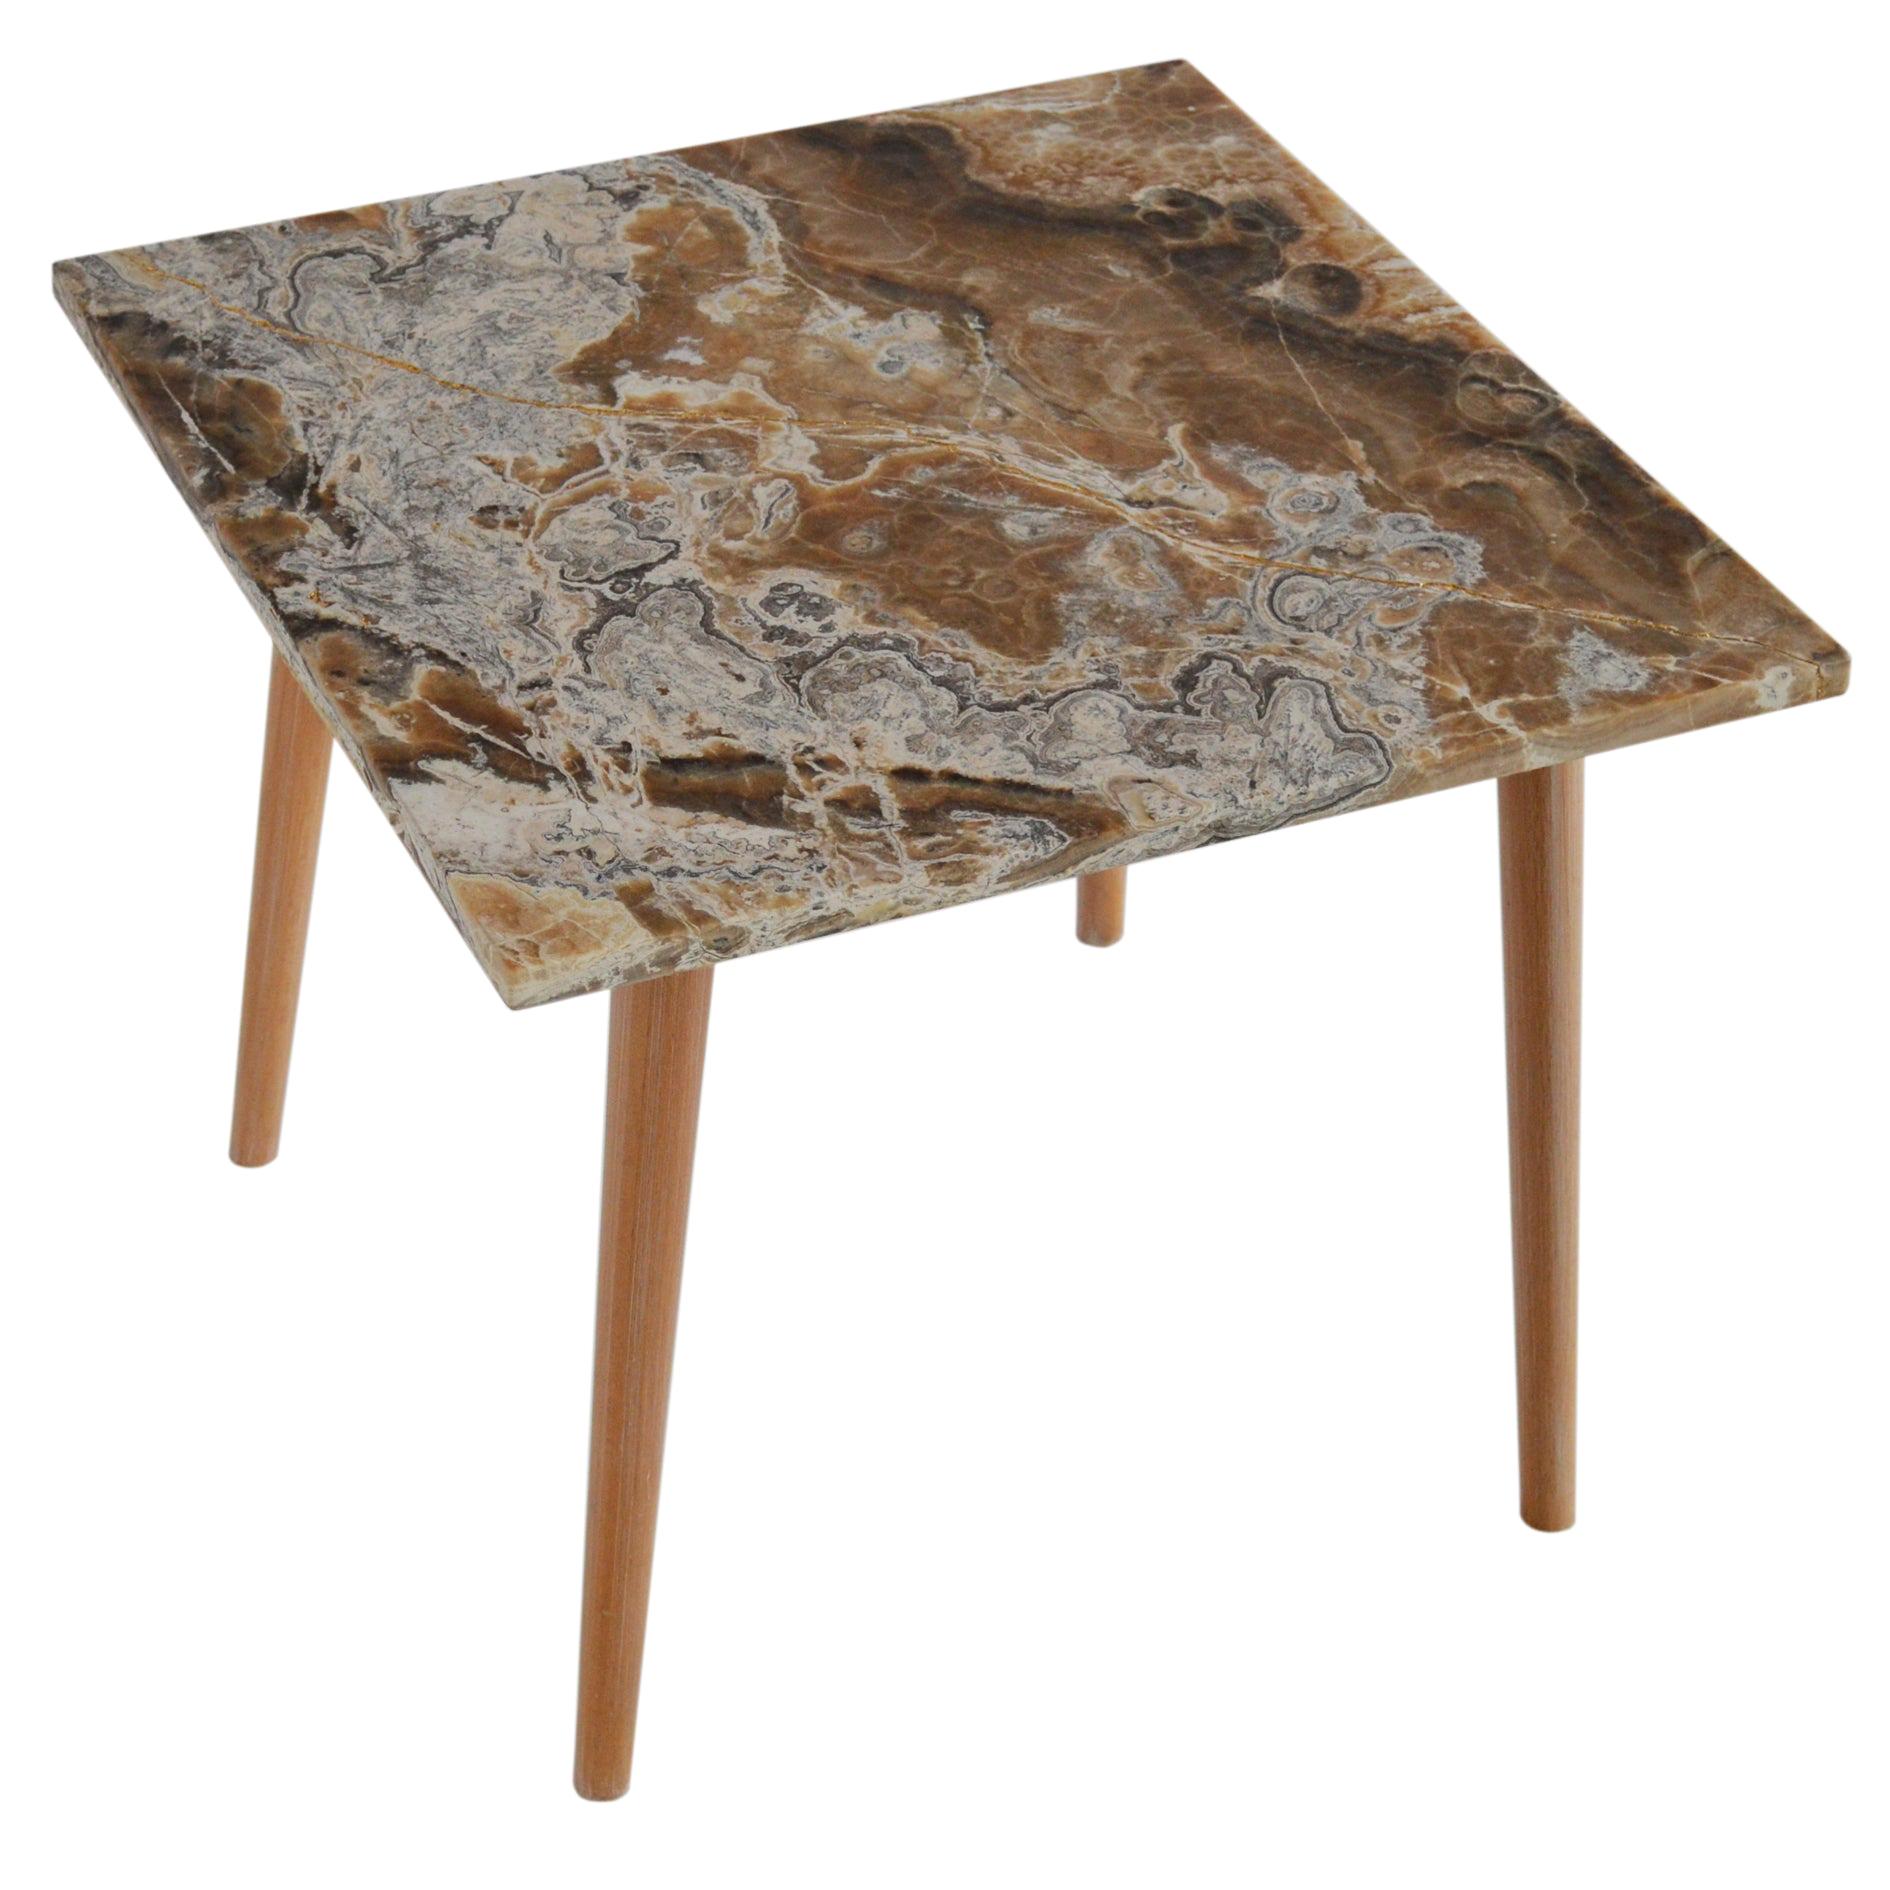 Square Onyx side Table Top Natural Wood Legs Gold Leaf Handmade art inlay.